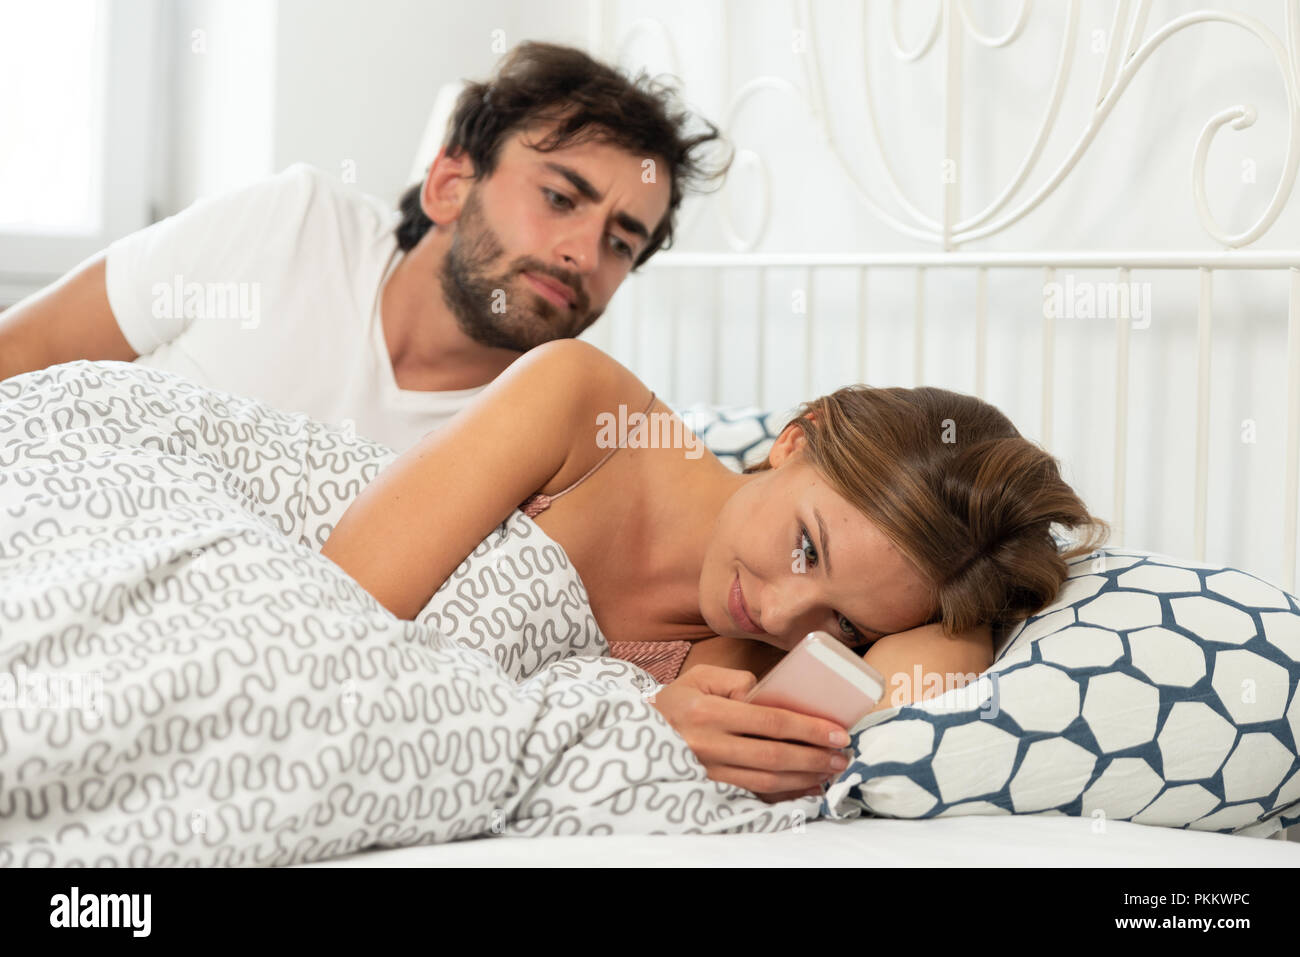 Jealous man checks what a woman with a phone in hand is doing. Concept of relationship, betrayal and jealousy Stock Photo